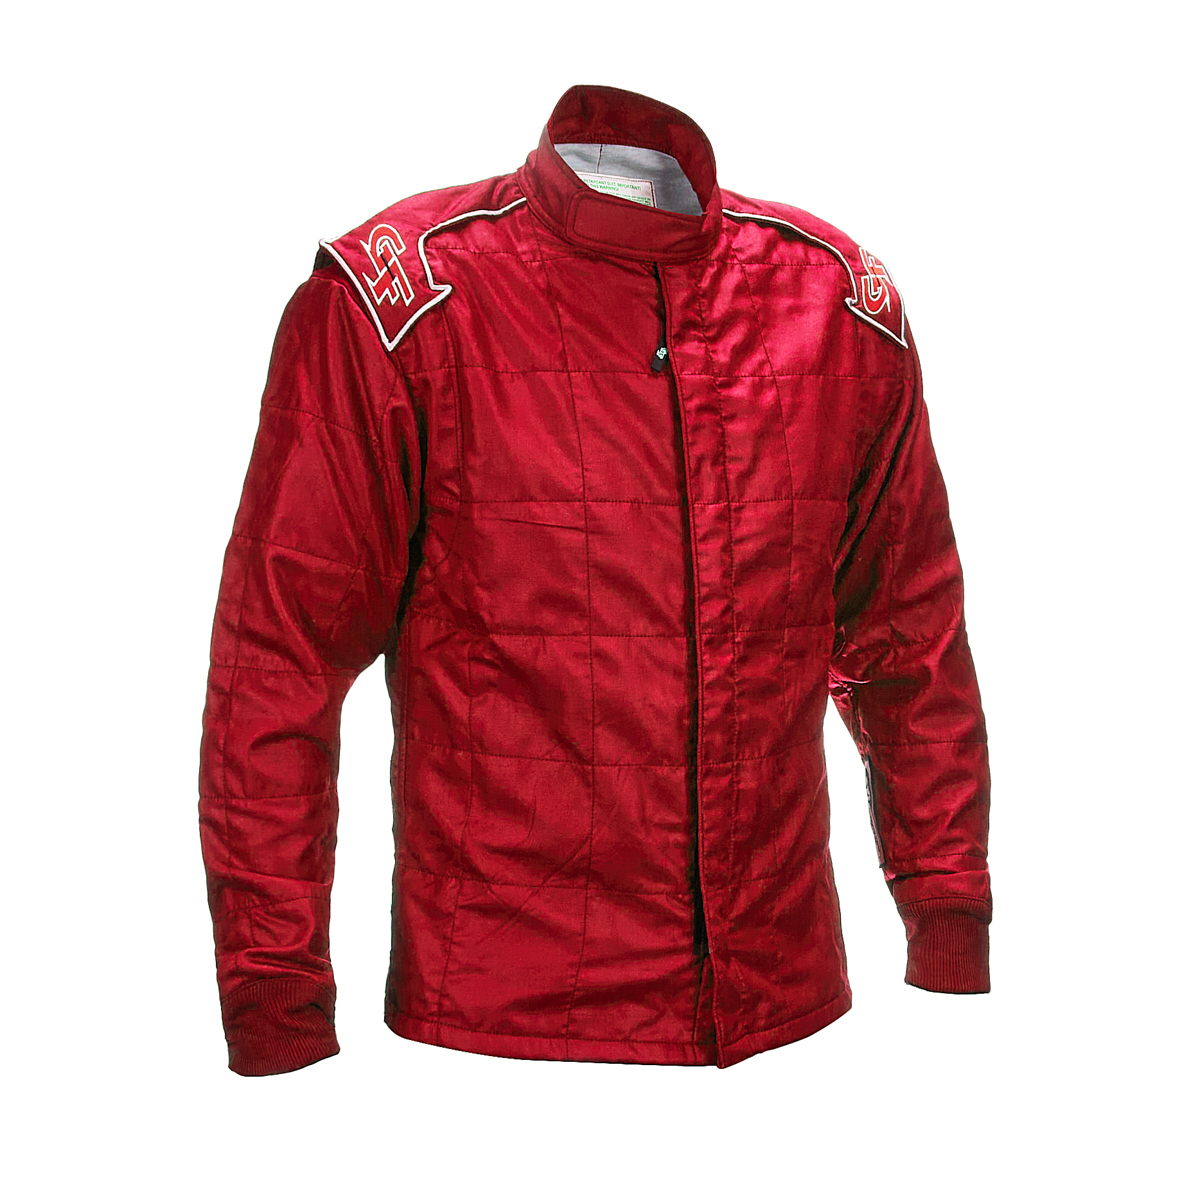 G-Force Racing Gear 35452SMLRD Driving Jacket, G-Limit, SFI 3.2A/5, Multiple Layer, Fire Retardant Cotton / Nomex, Red, Small, Each